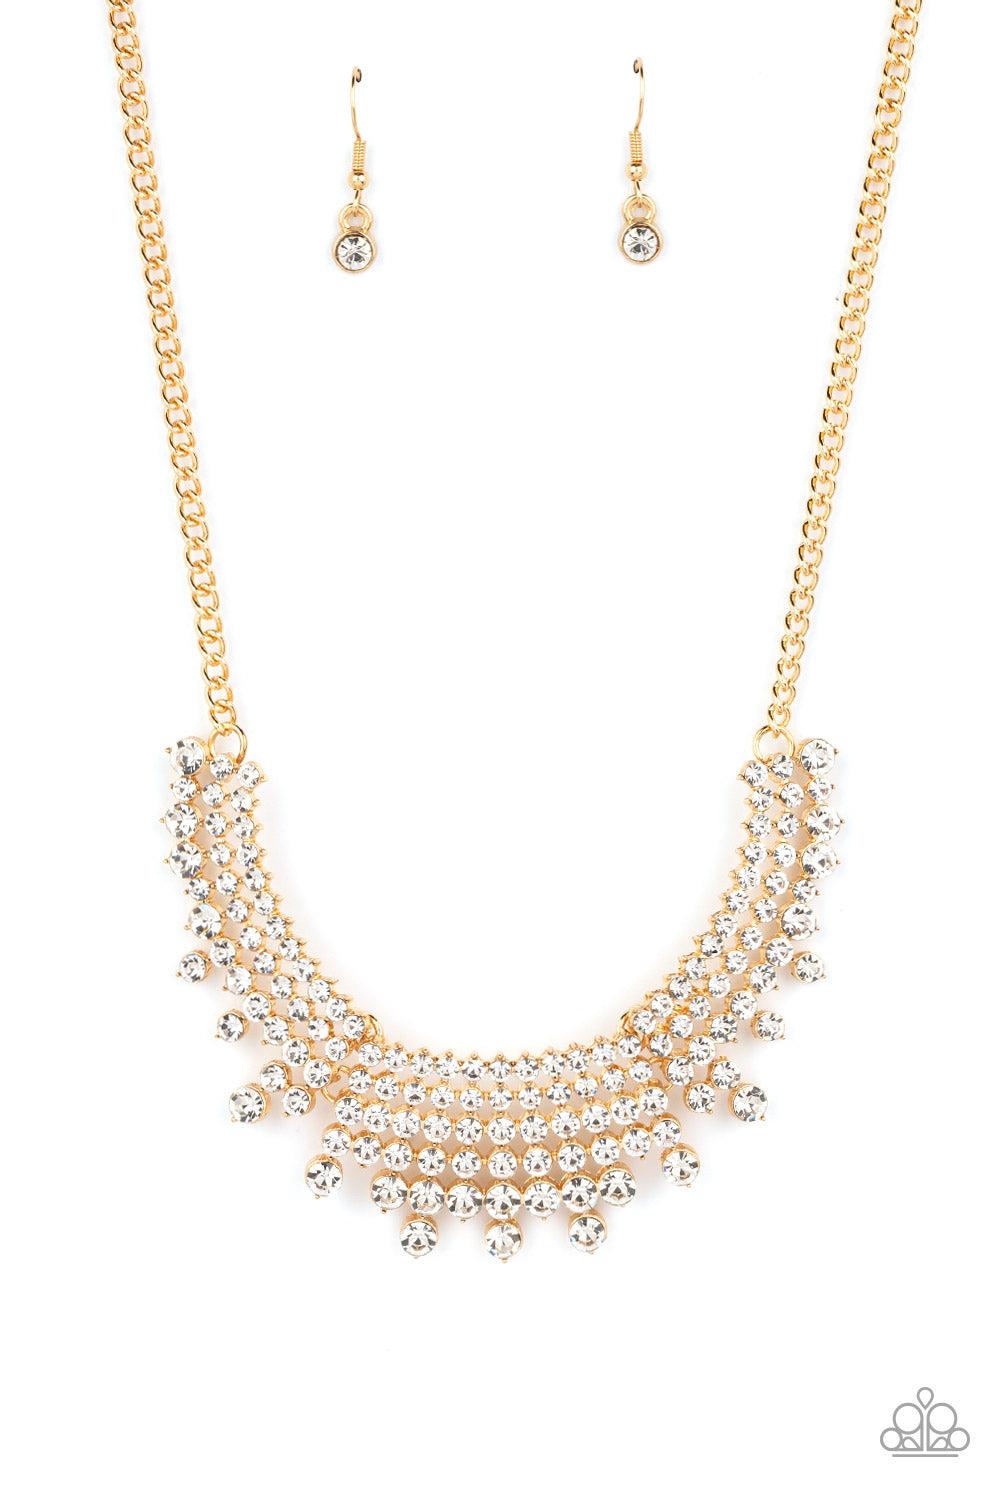 Shimmering Song Gold & White Rhinestone Necklace - Paparazzi Accessories- lightbox - CarasShop.com - $5 Jewelry by Cara Jewels